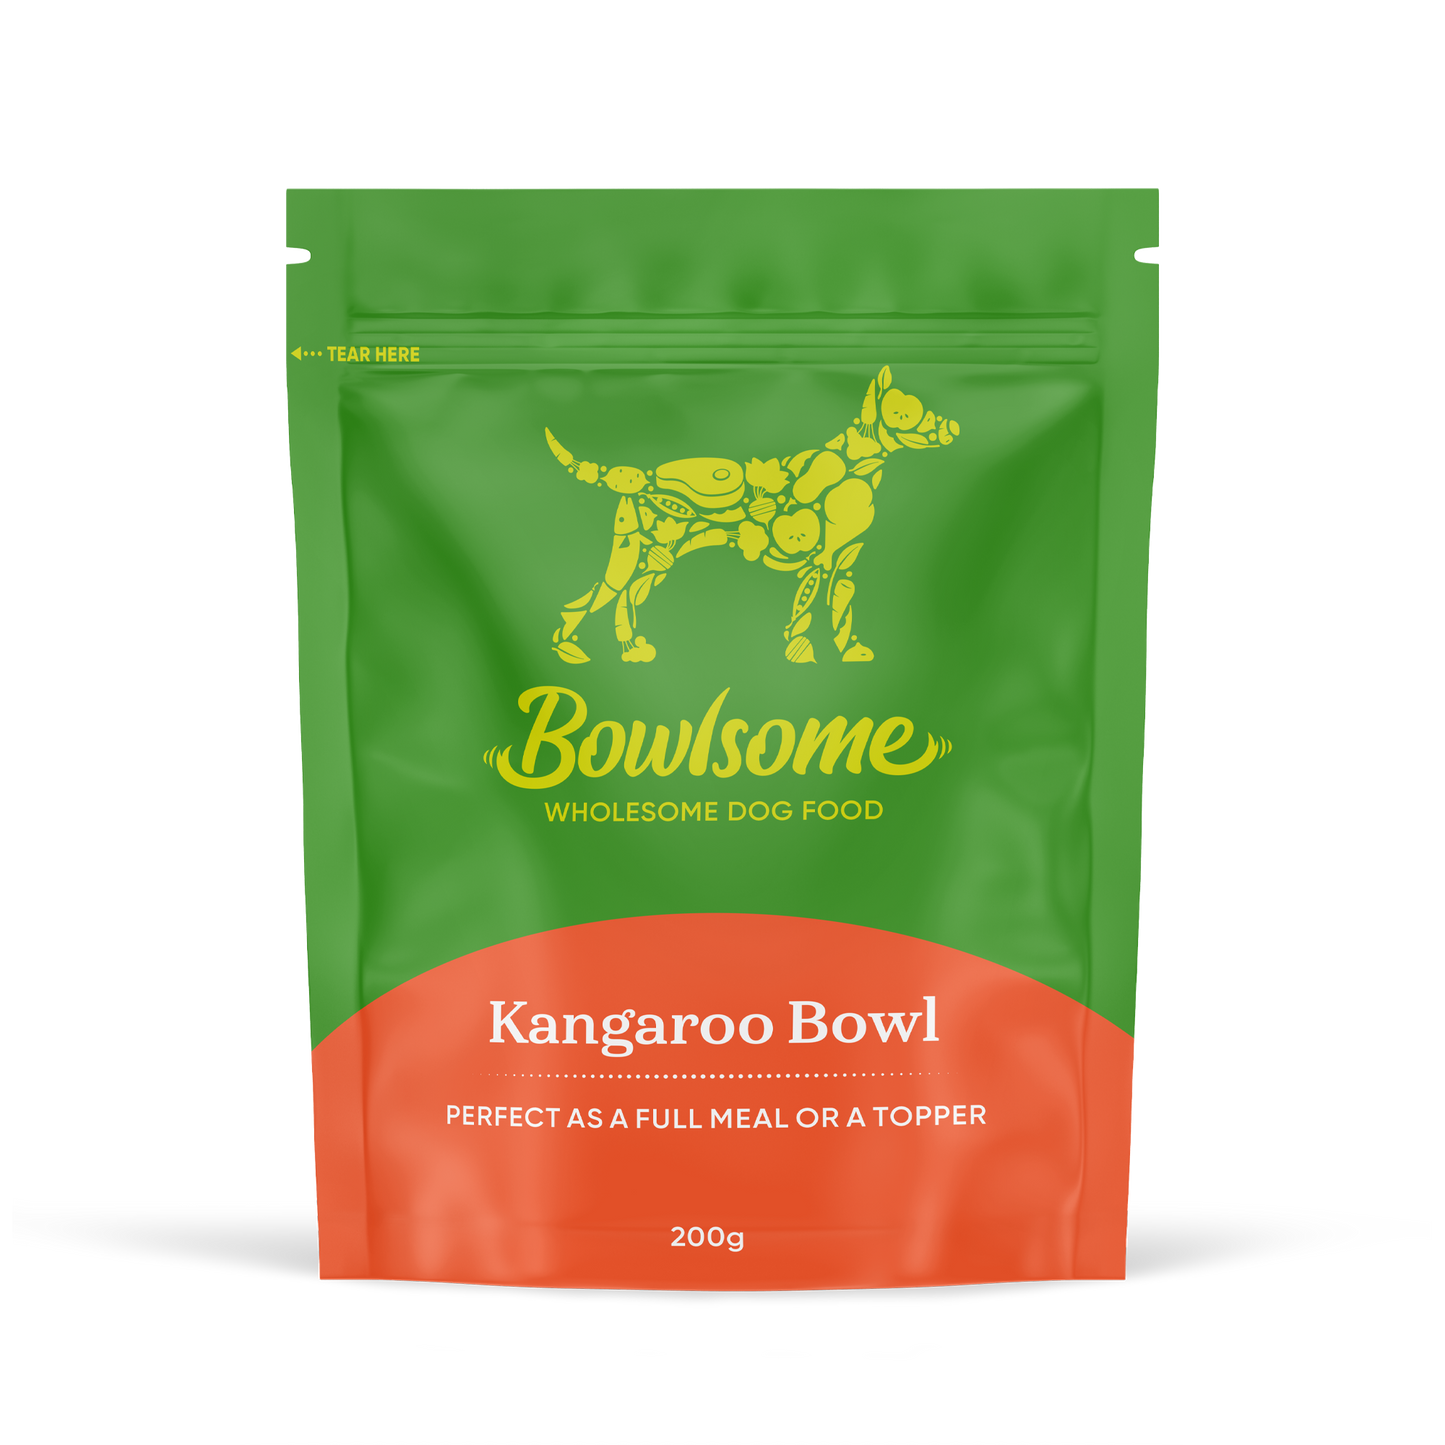 Pouch of dog food that reads "Bowlsome - Wholesome Dog Food, Kangaroo Bowl"